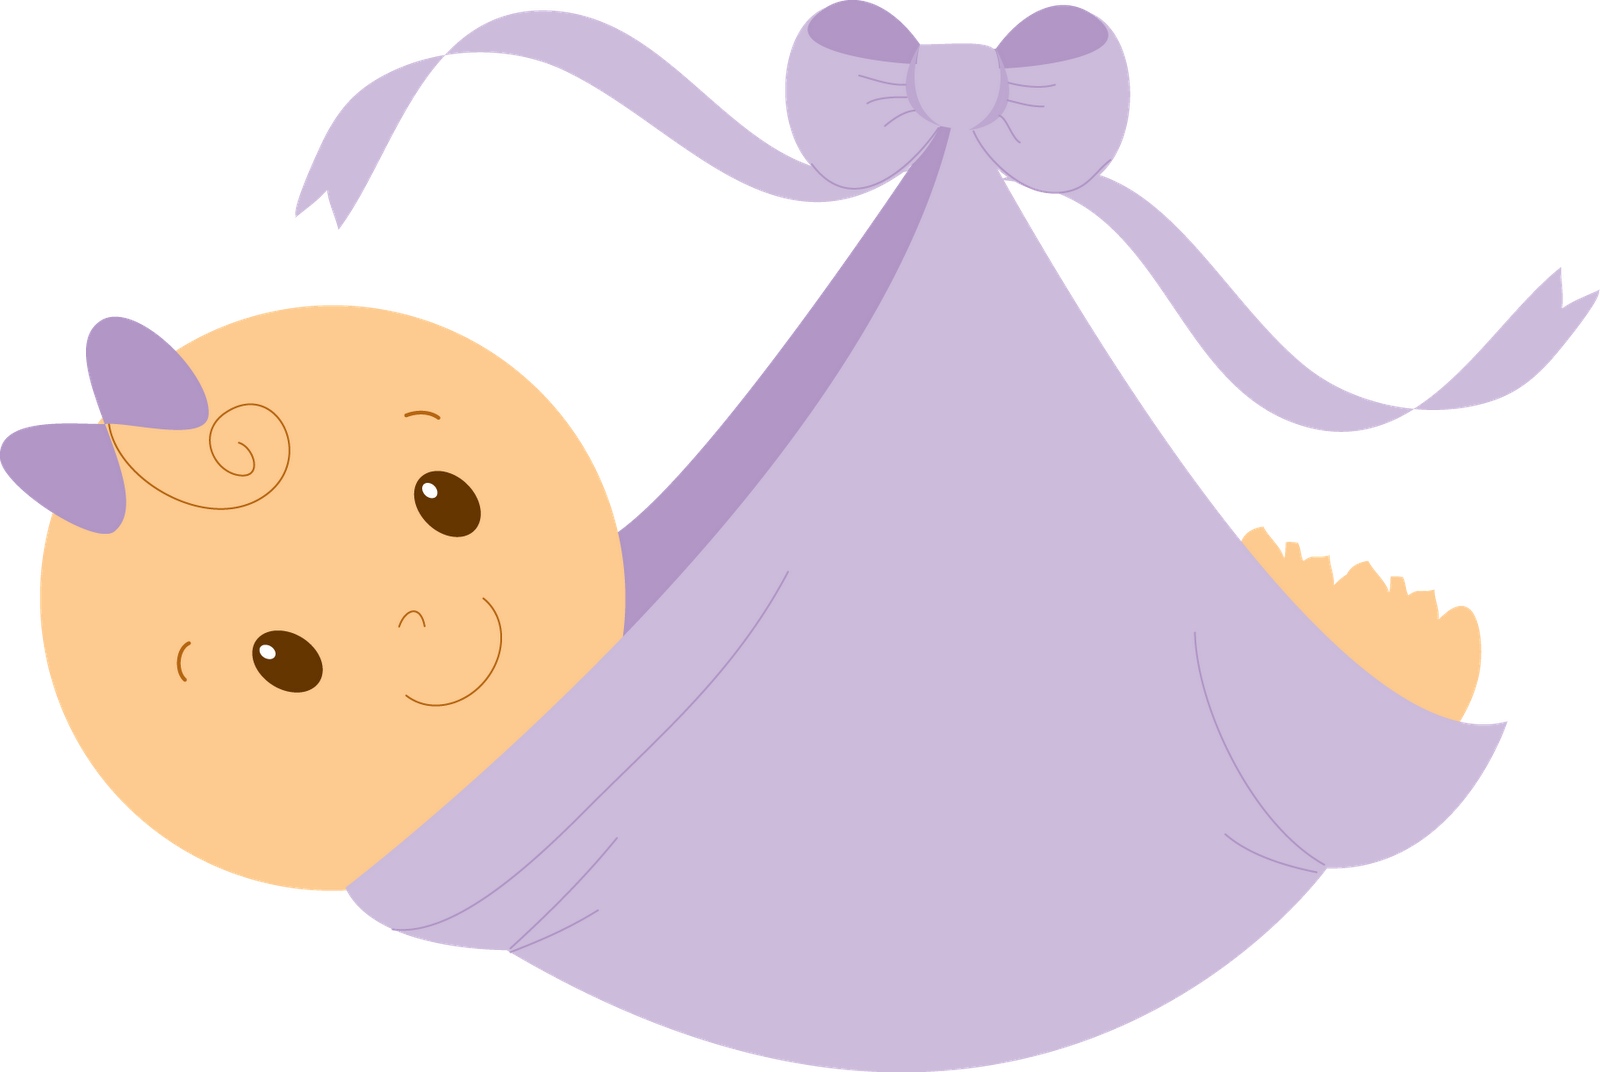 Ghost clipart item. Baby items images png